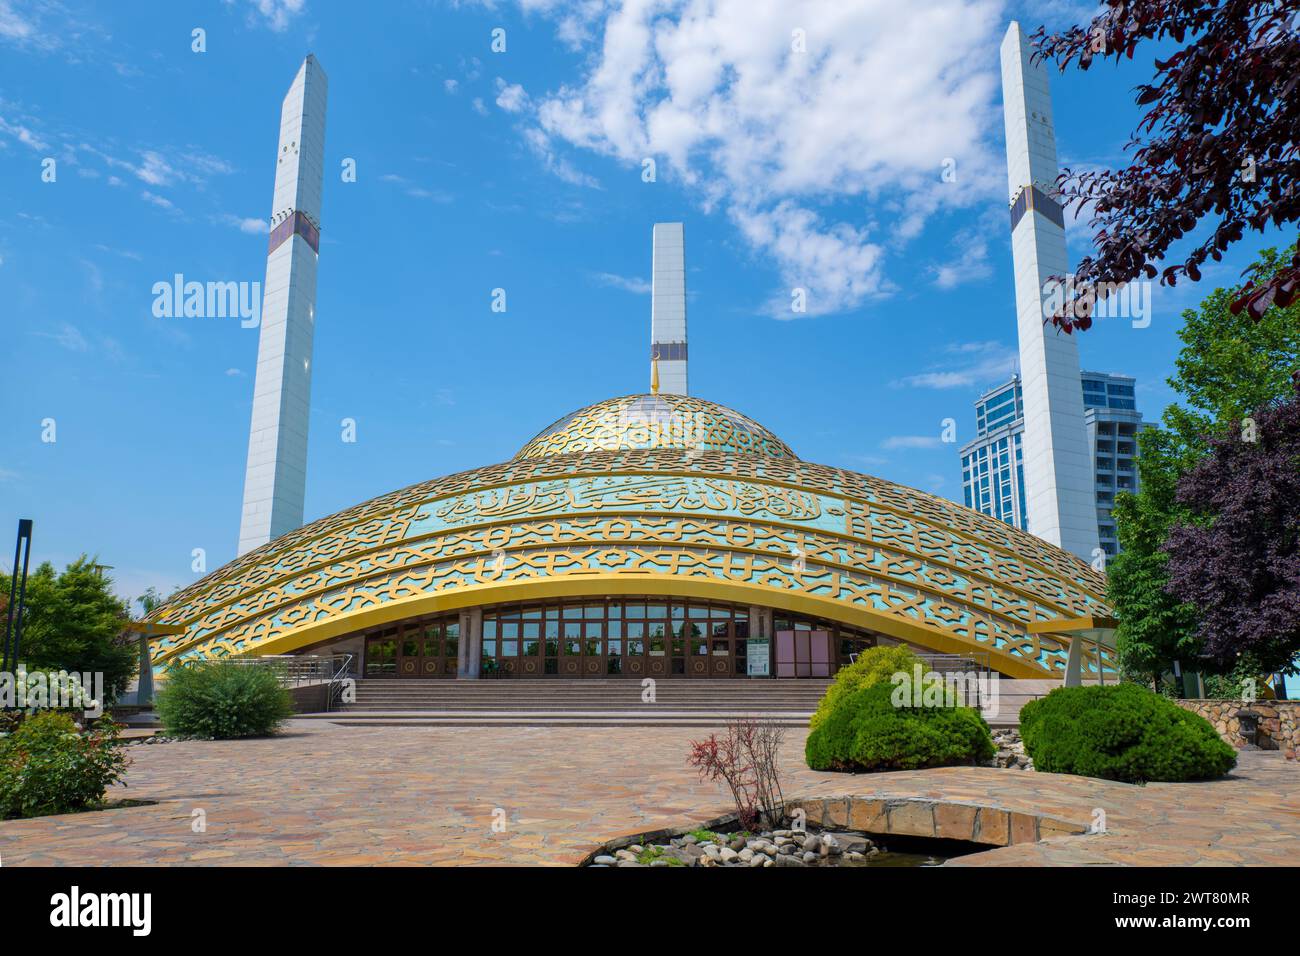 ARGUN, RUSSIA - JUNE 14, 2023: Mother's Heart Mosque (Mosque named after Aimani Kadyrova) on a sunny June day Stock Photo